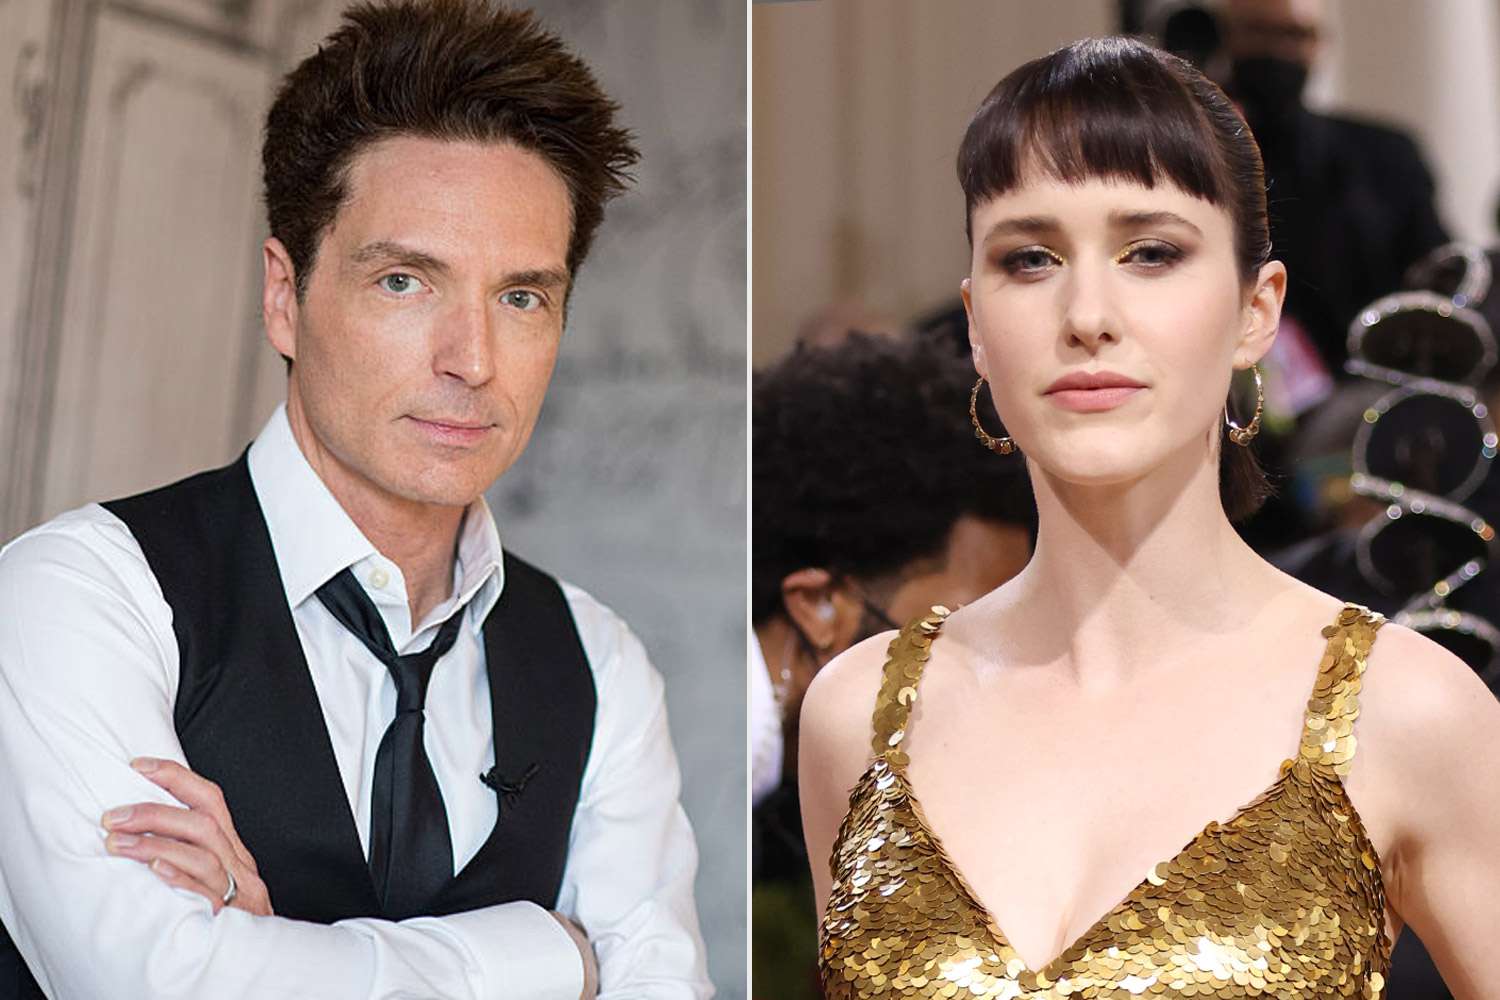 Rachel Brosnahan and Richard Marx, Who Grew Up in Highland Park, React to July 4th Parade Shooting